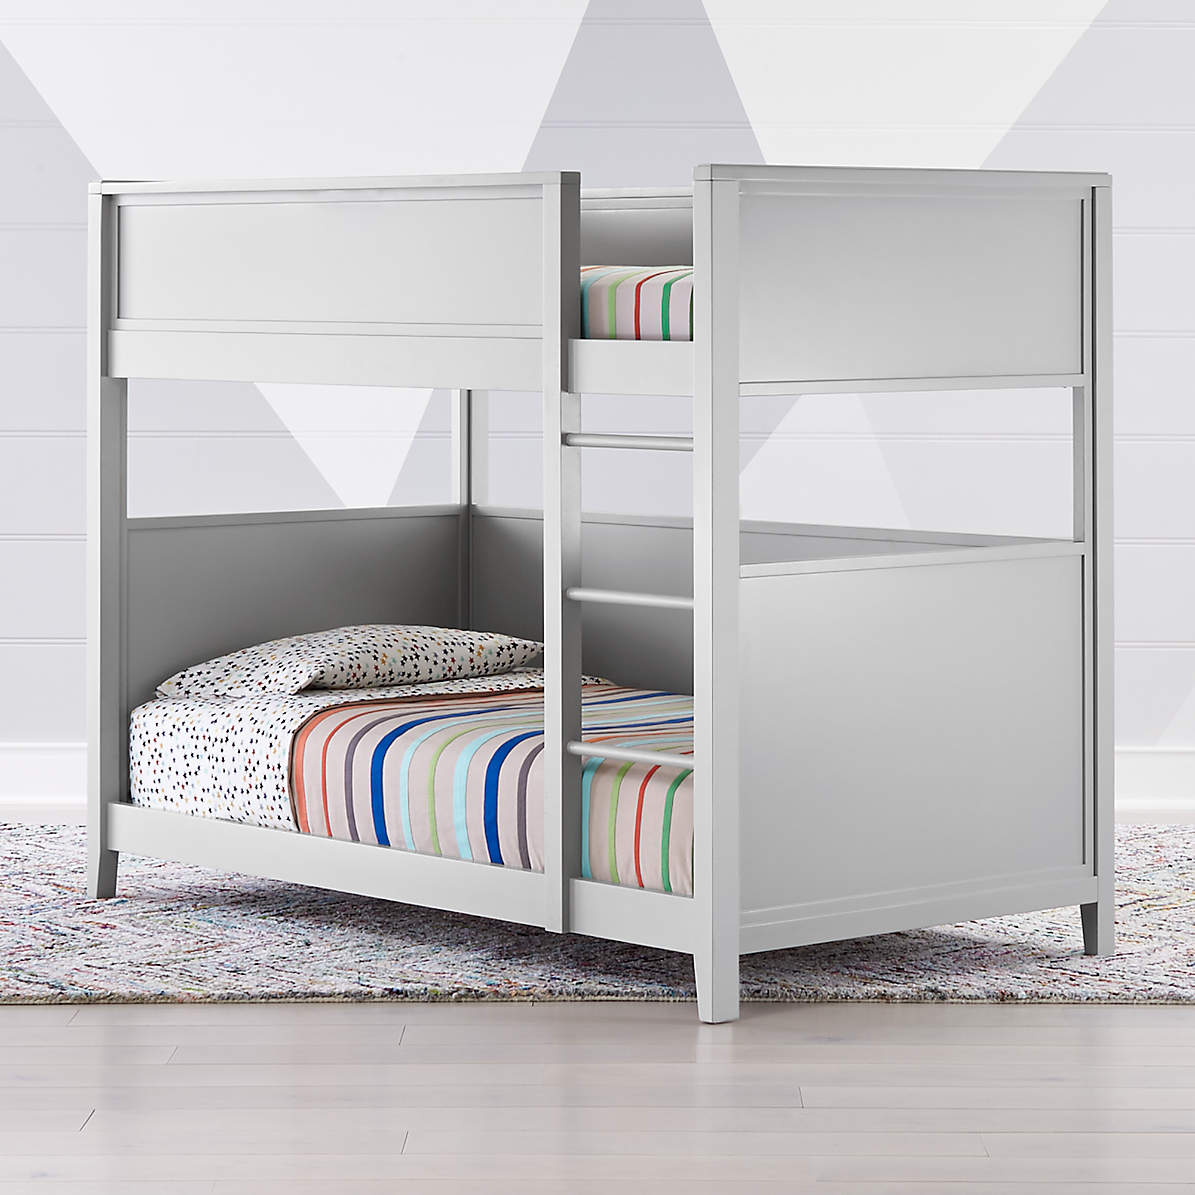 Small Space Kids Twin Bunk Bed, Can You Use A Twin Mattress On Bunk Beds